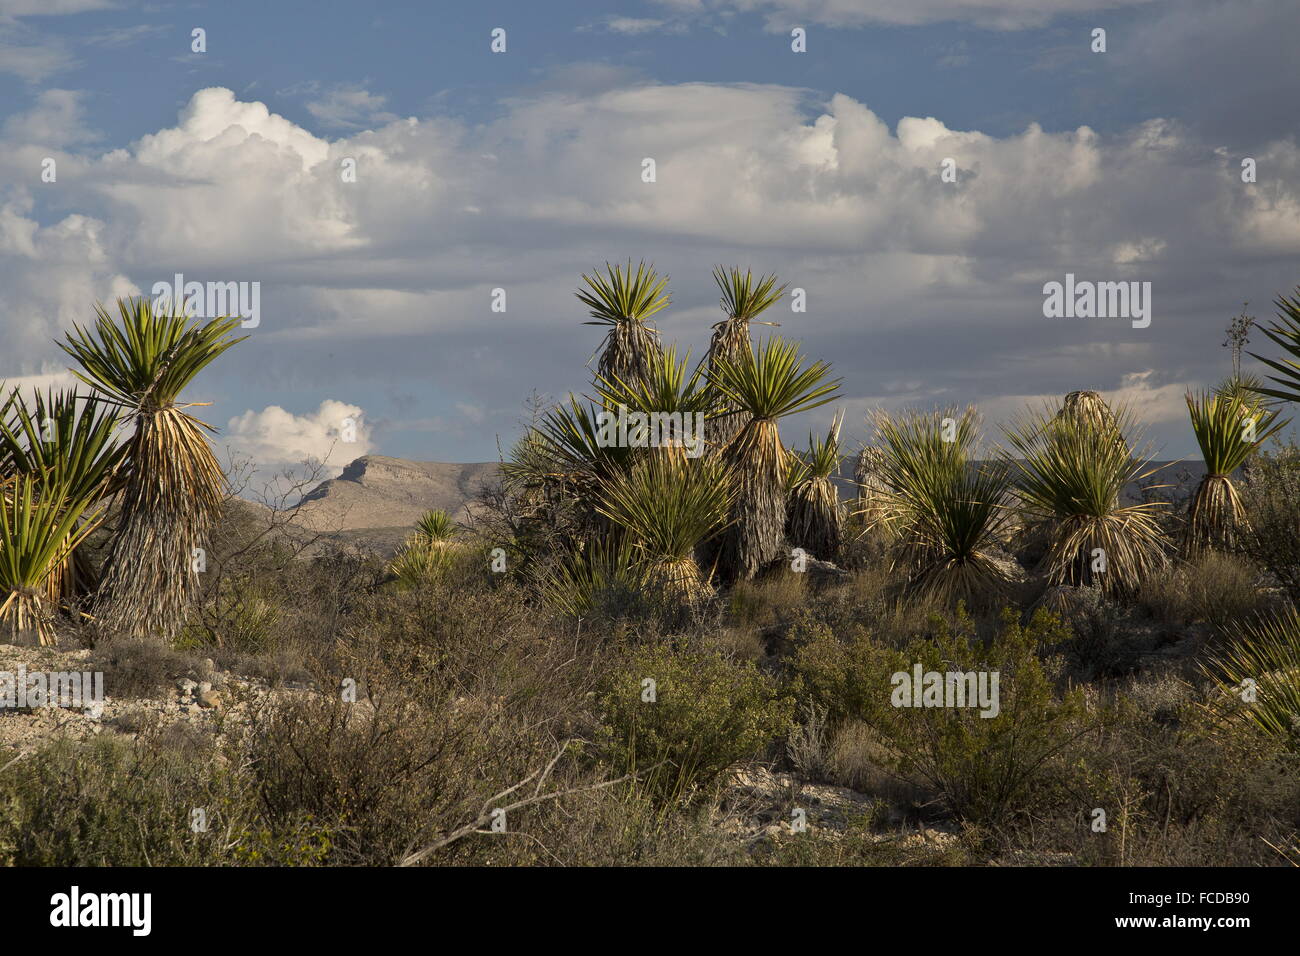 Spanish dagger or Torrey Yucca, Yucca faxoniana, on Dagger Flats, with Deadhorse Mountains beyond; Big Bend National Park, Texas Stock Photo